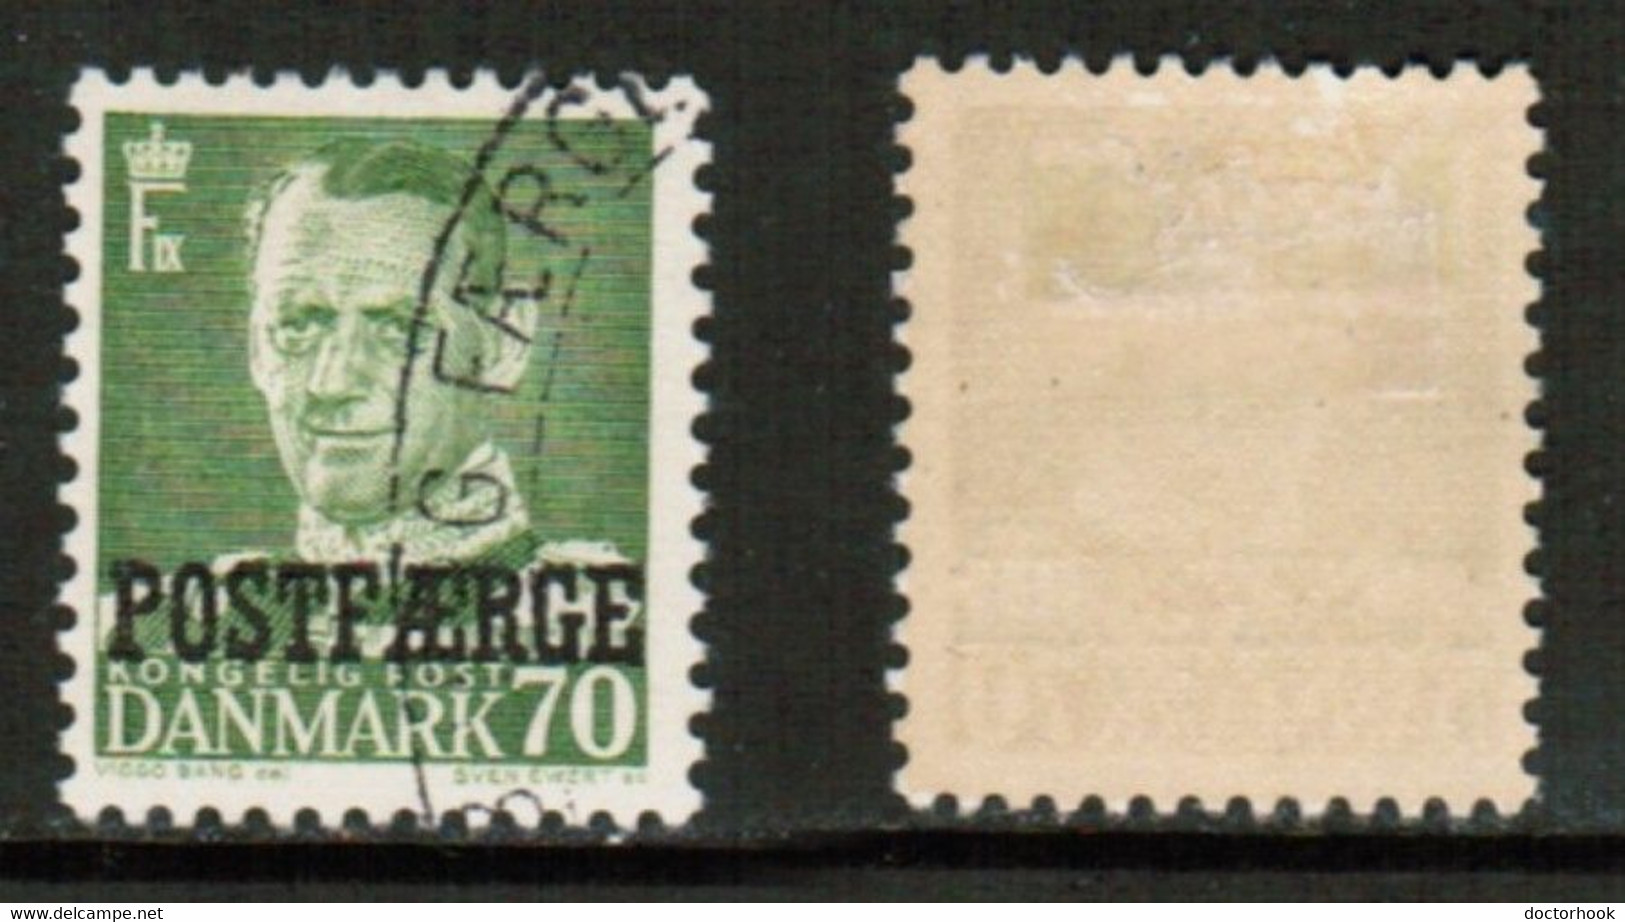 DENMARK   Scott # Q 39 USED (CONDITION AS PER SCAN) (Stamp Scan # 864-17) - Pacchi Postali